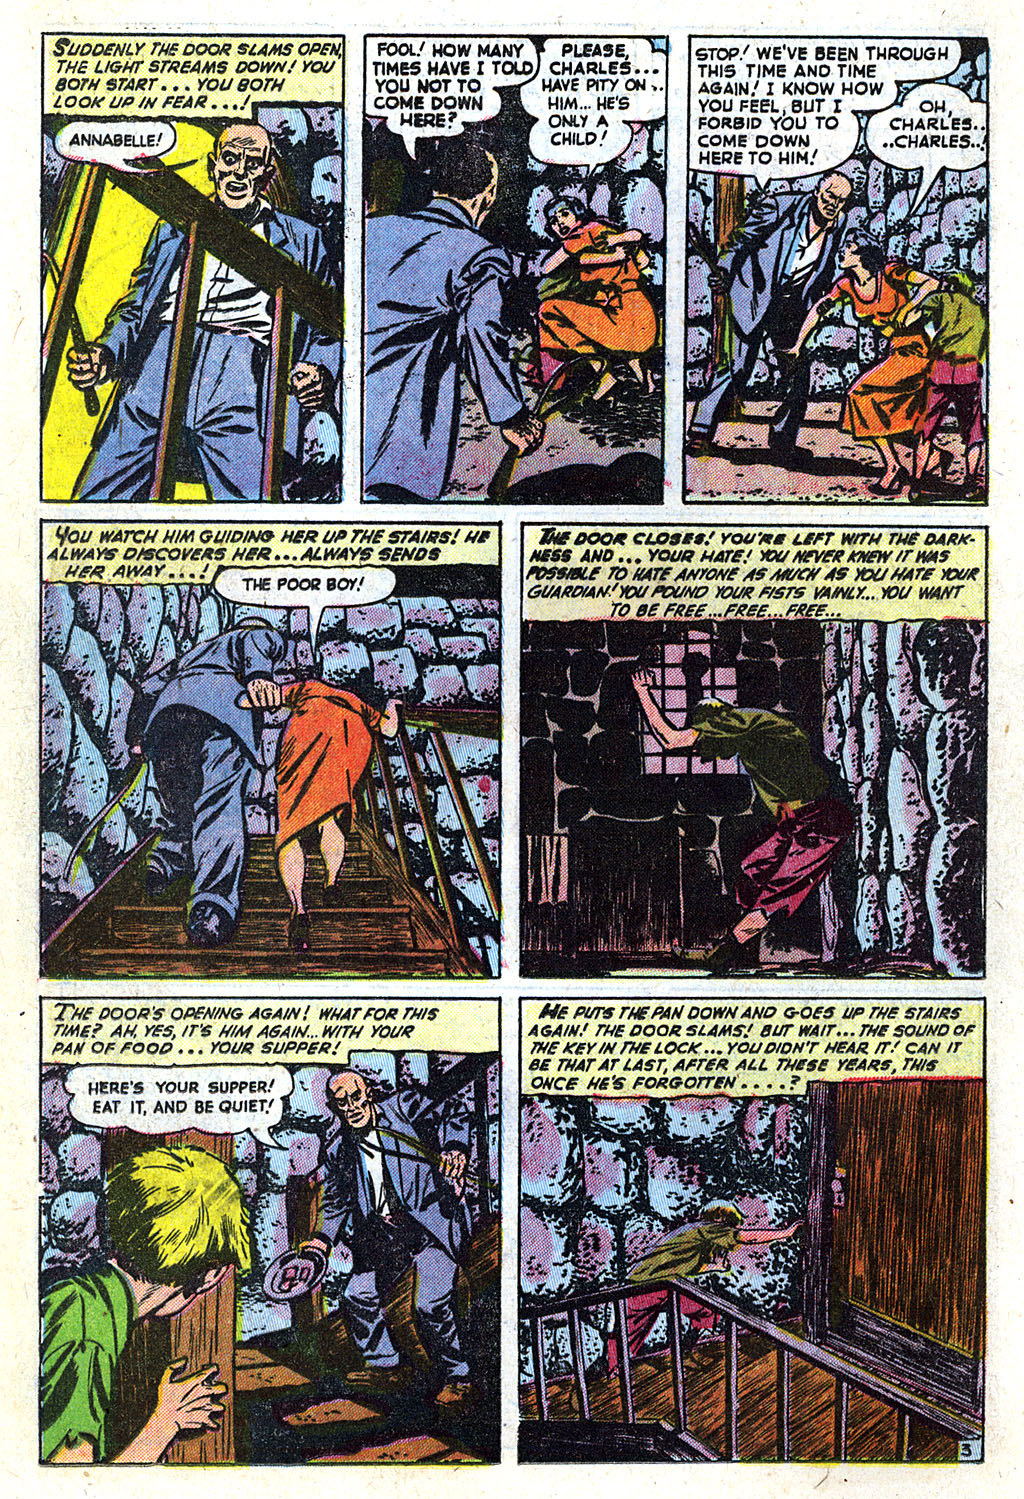 Marvel Tales (1949) 107 Page 11